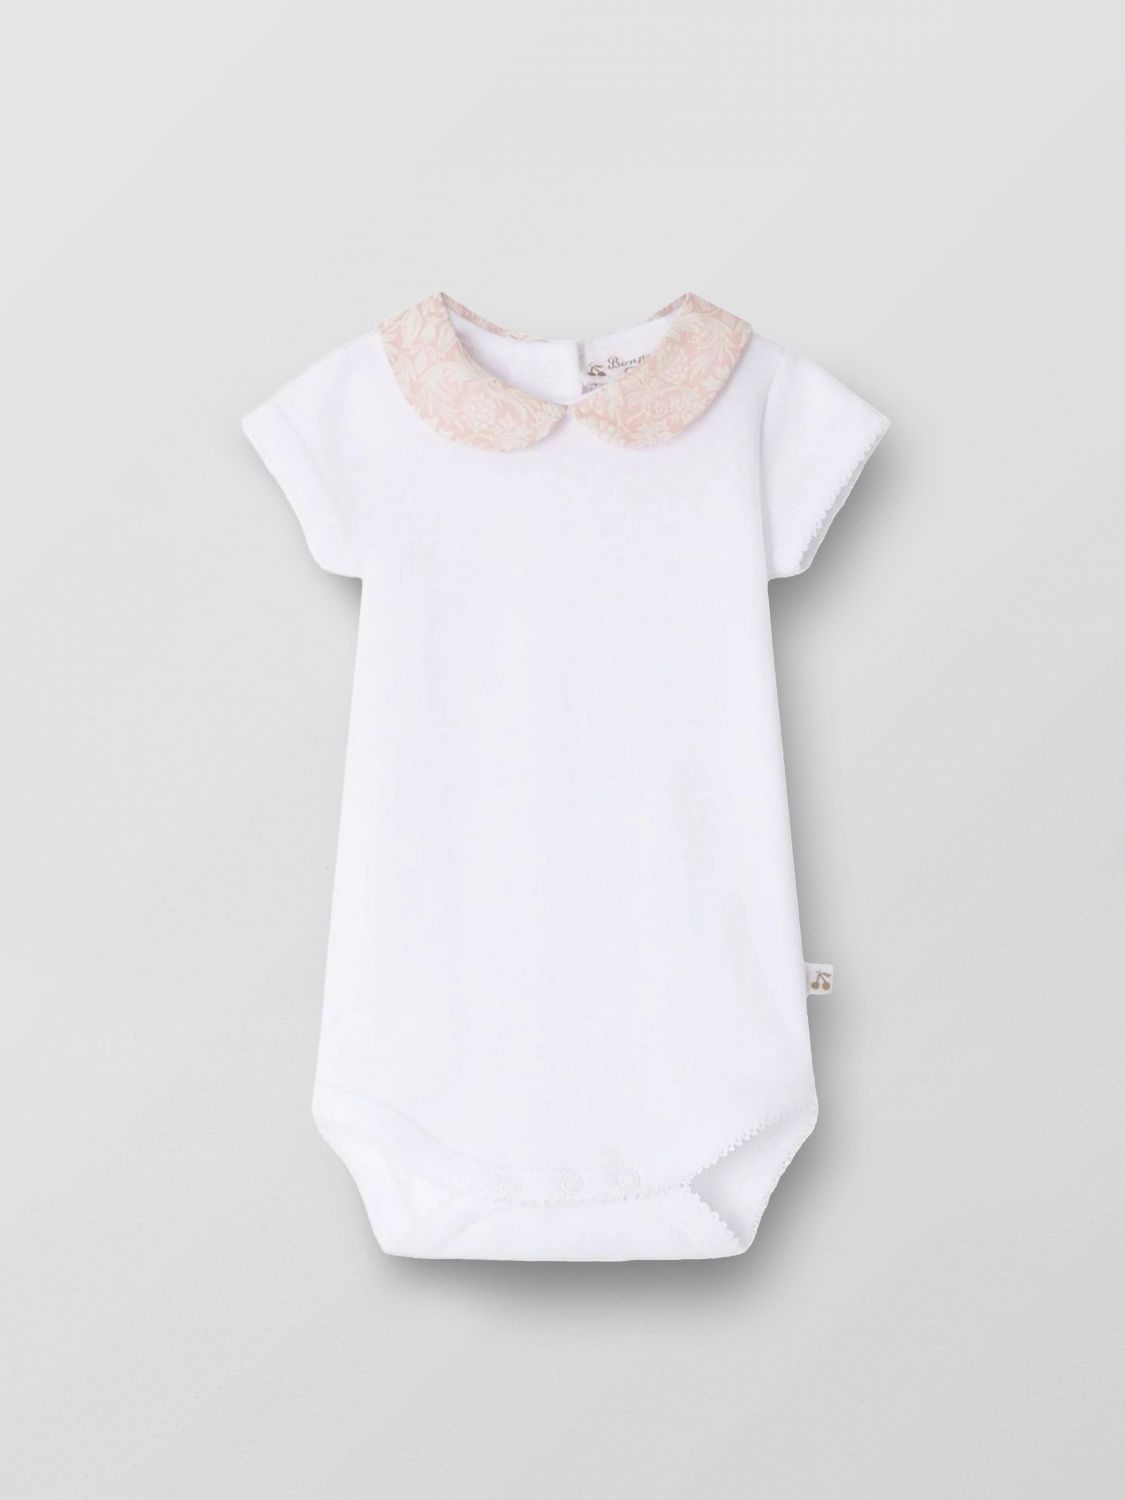 Bonpoint Babies' White And Pale Pink Calix Bodysuit